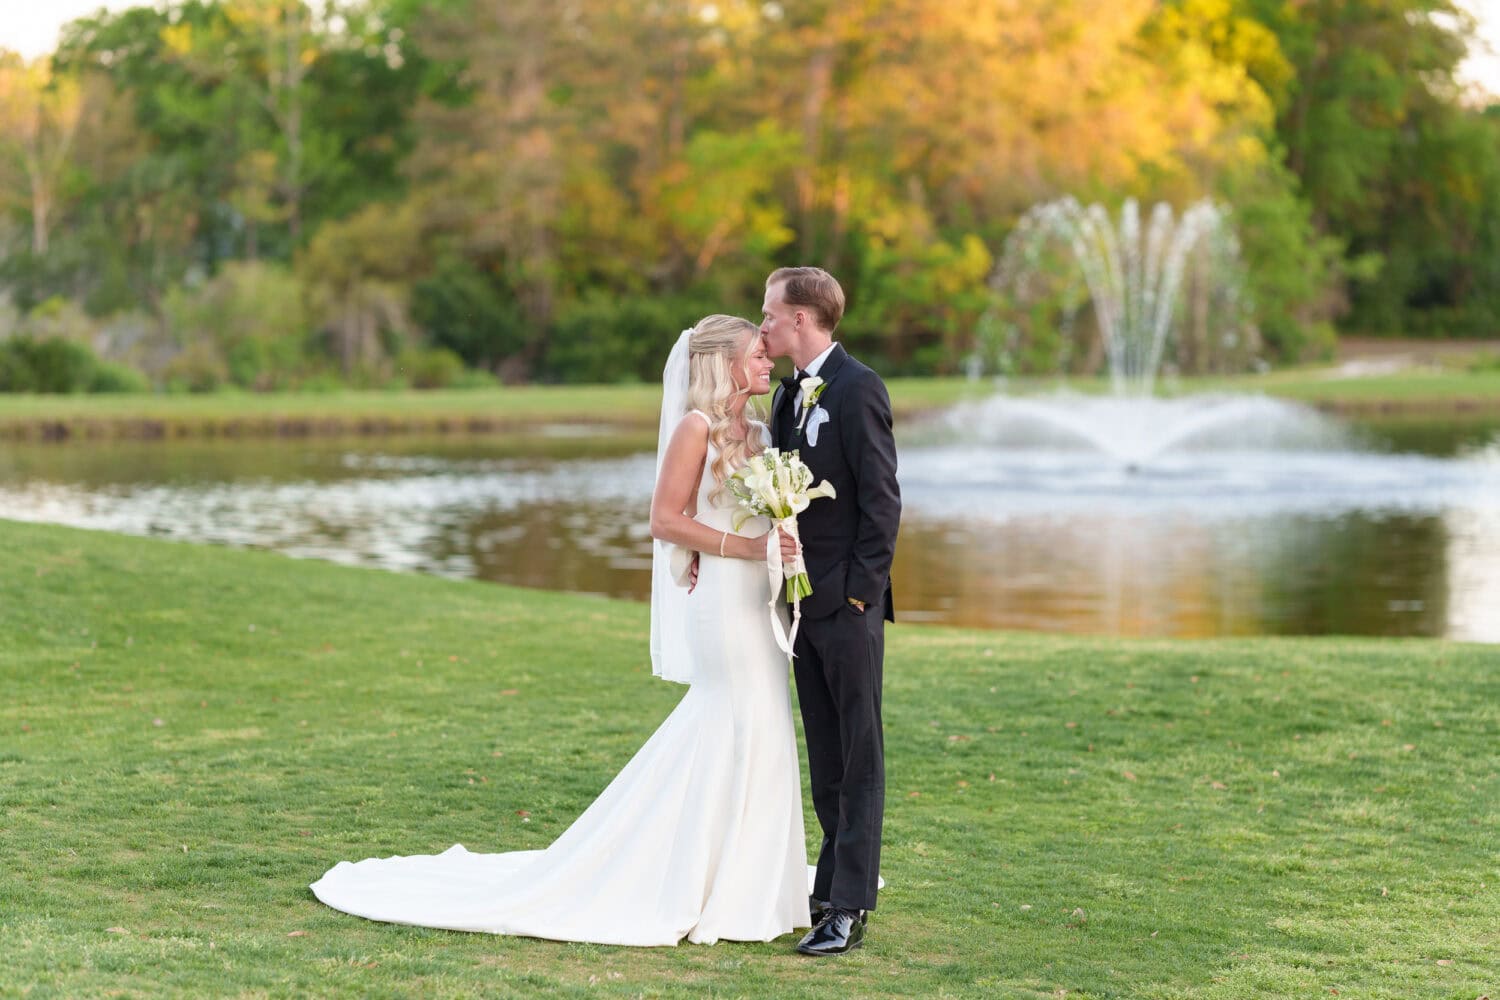 Portraits of the bride and groom in front of the lake and fountain - Pawleys Plantation